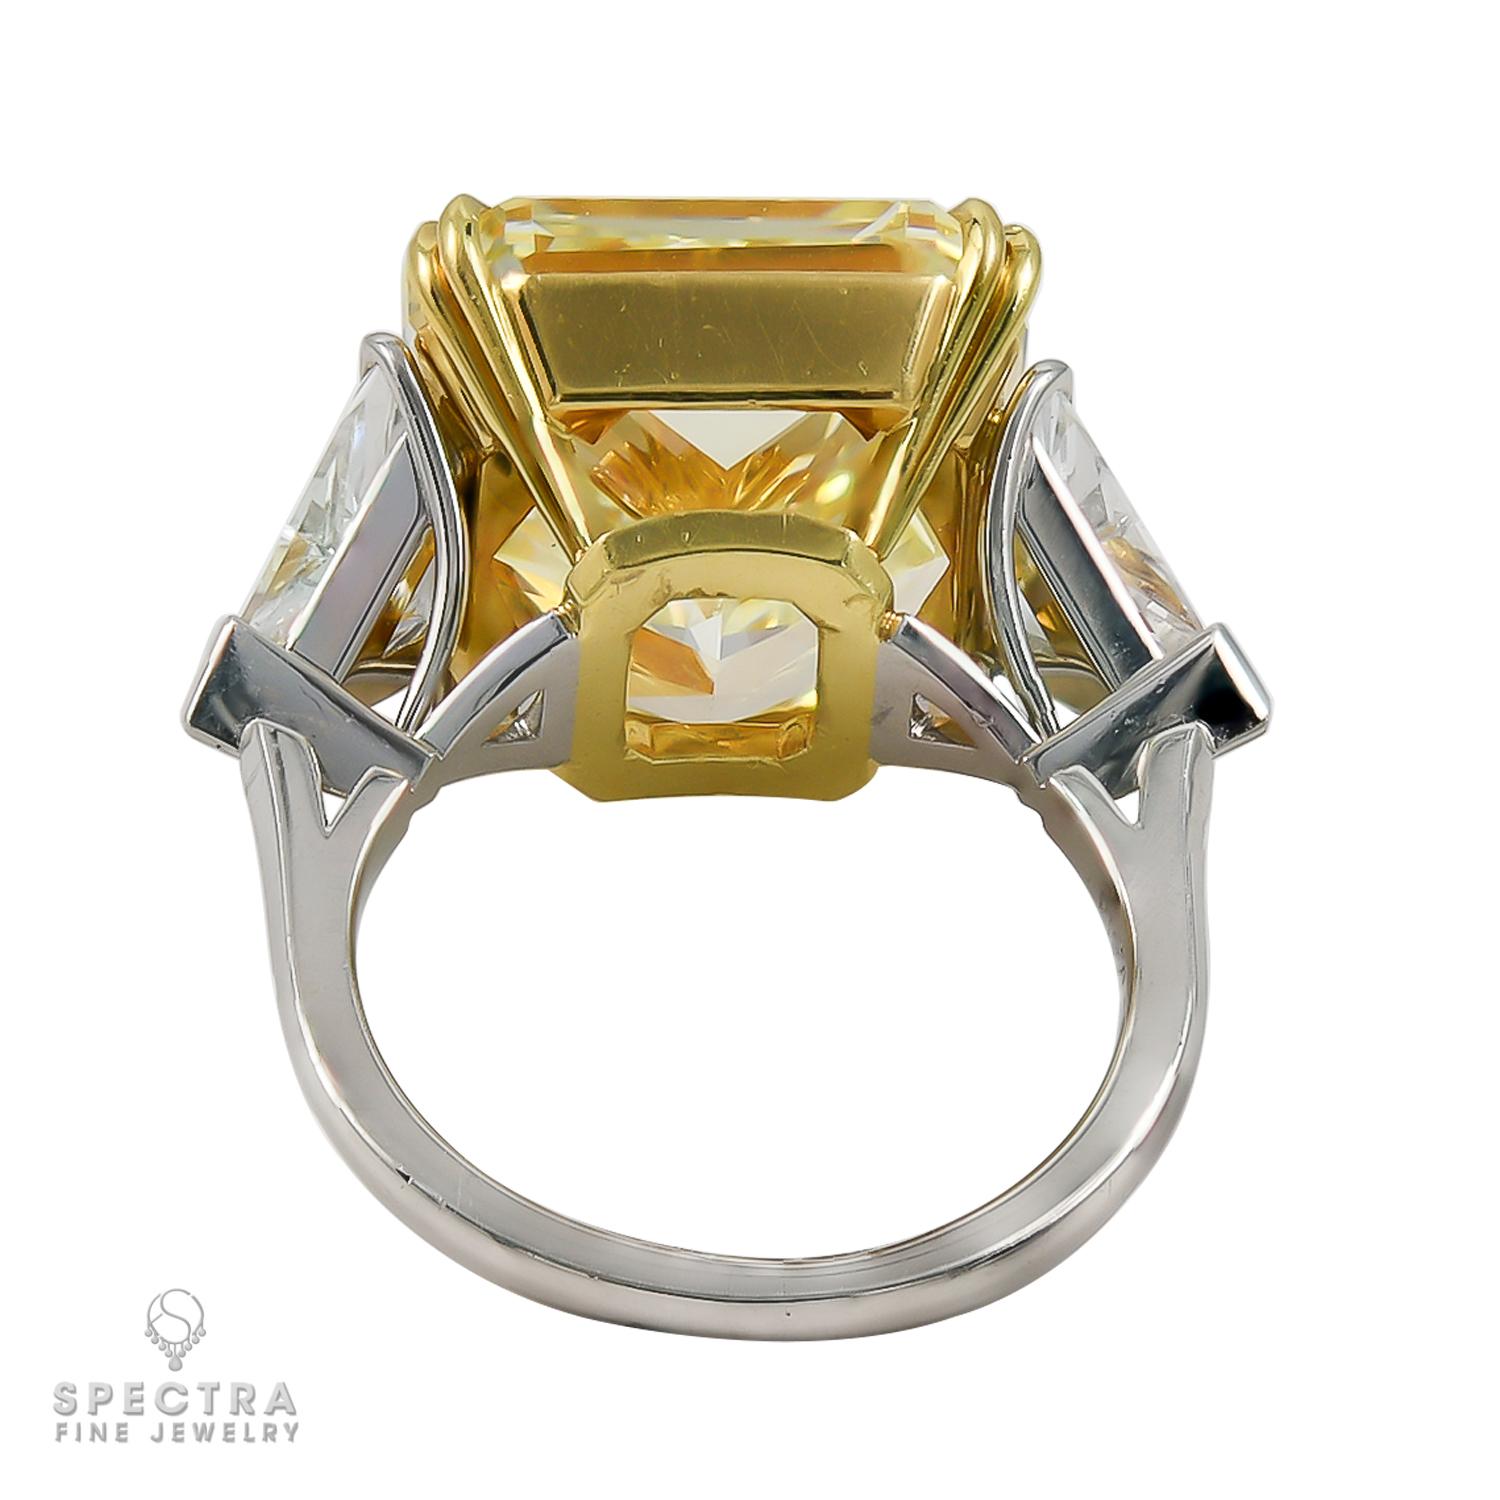 Radiant Cut Spectra Fine Jewelry GIA Certified 20.11 Carat Canary Diamond Ring For Sale